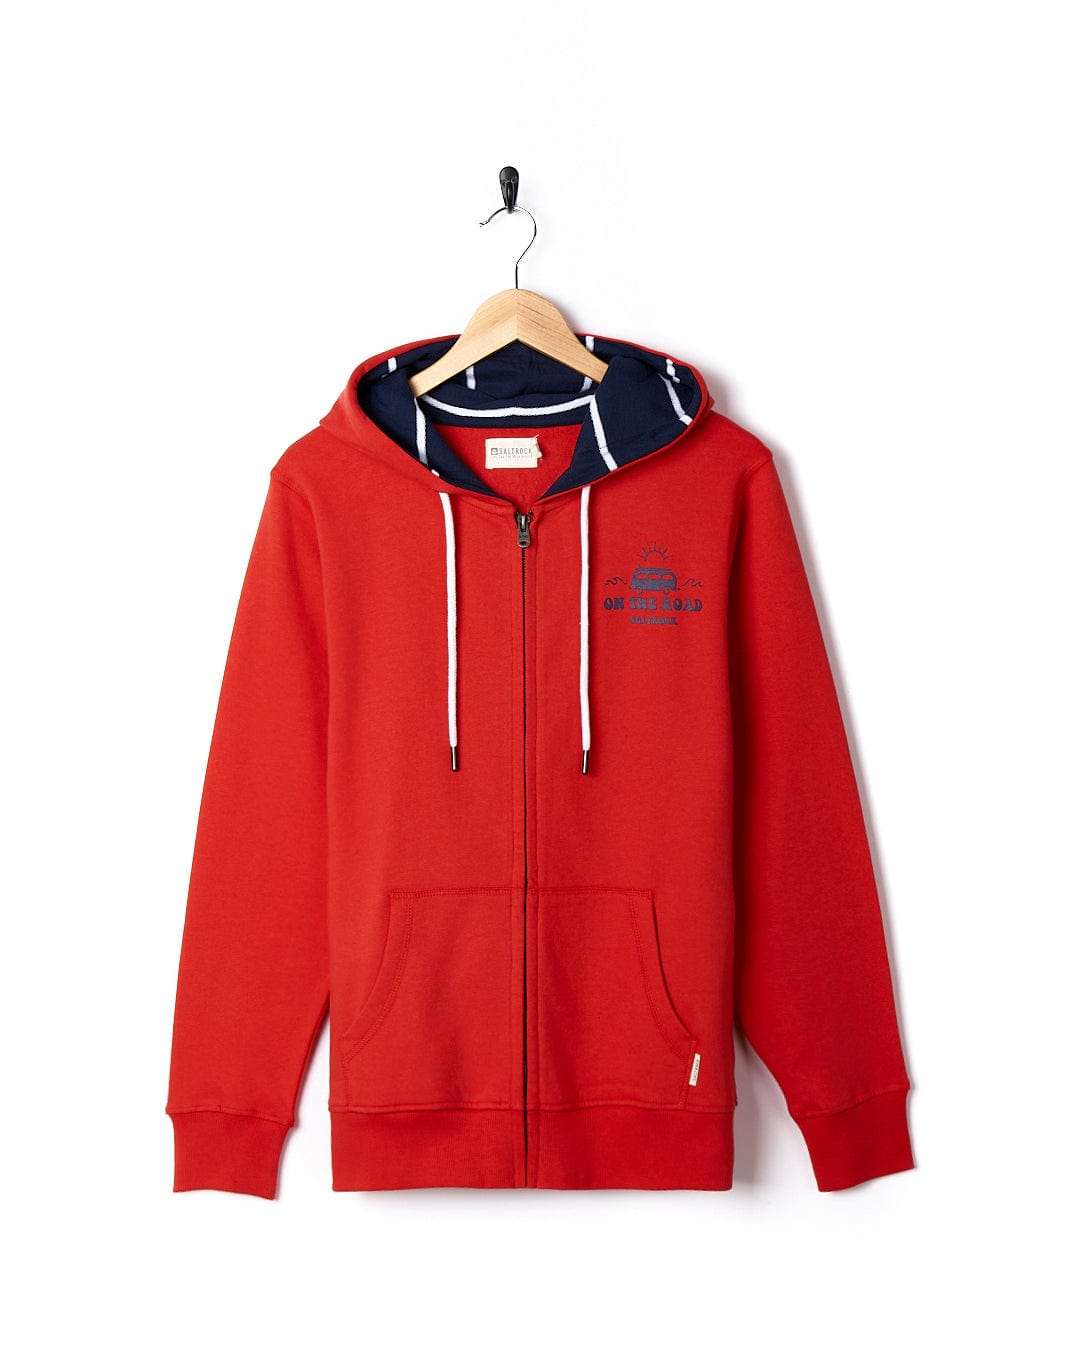 A Saltrock On The Road Devon - Womens Zip Hoodie - Red with a navy logo.